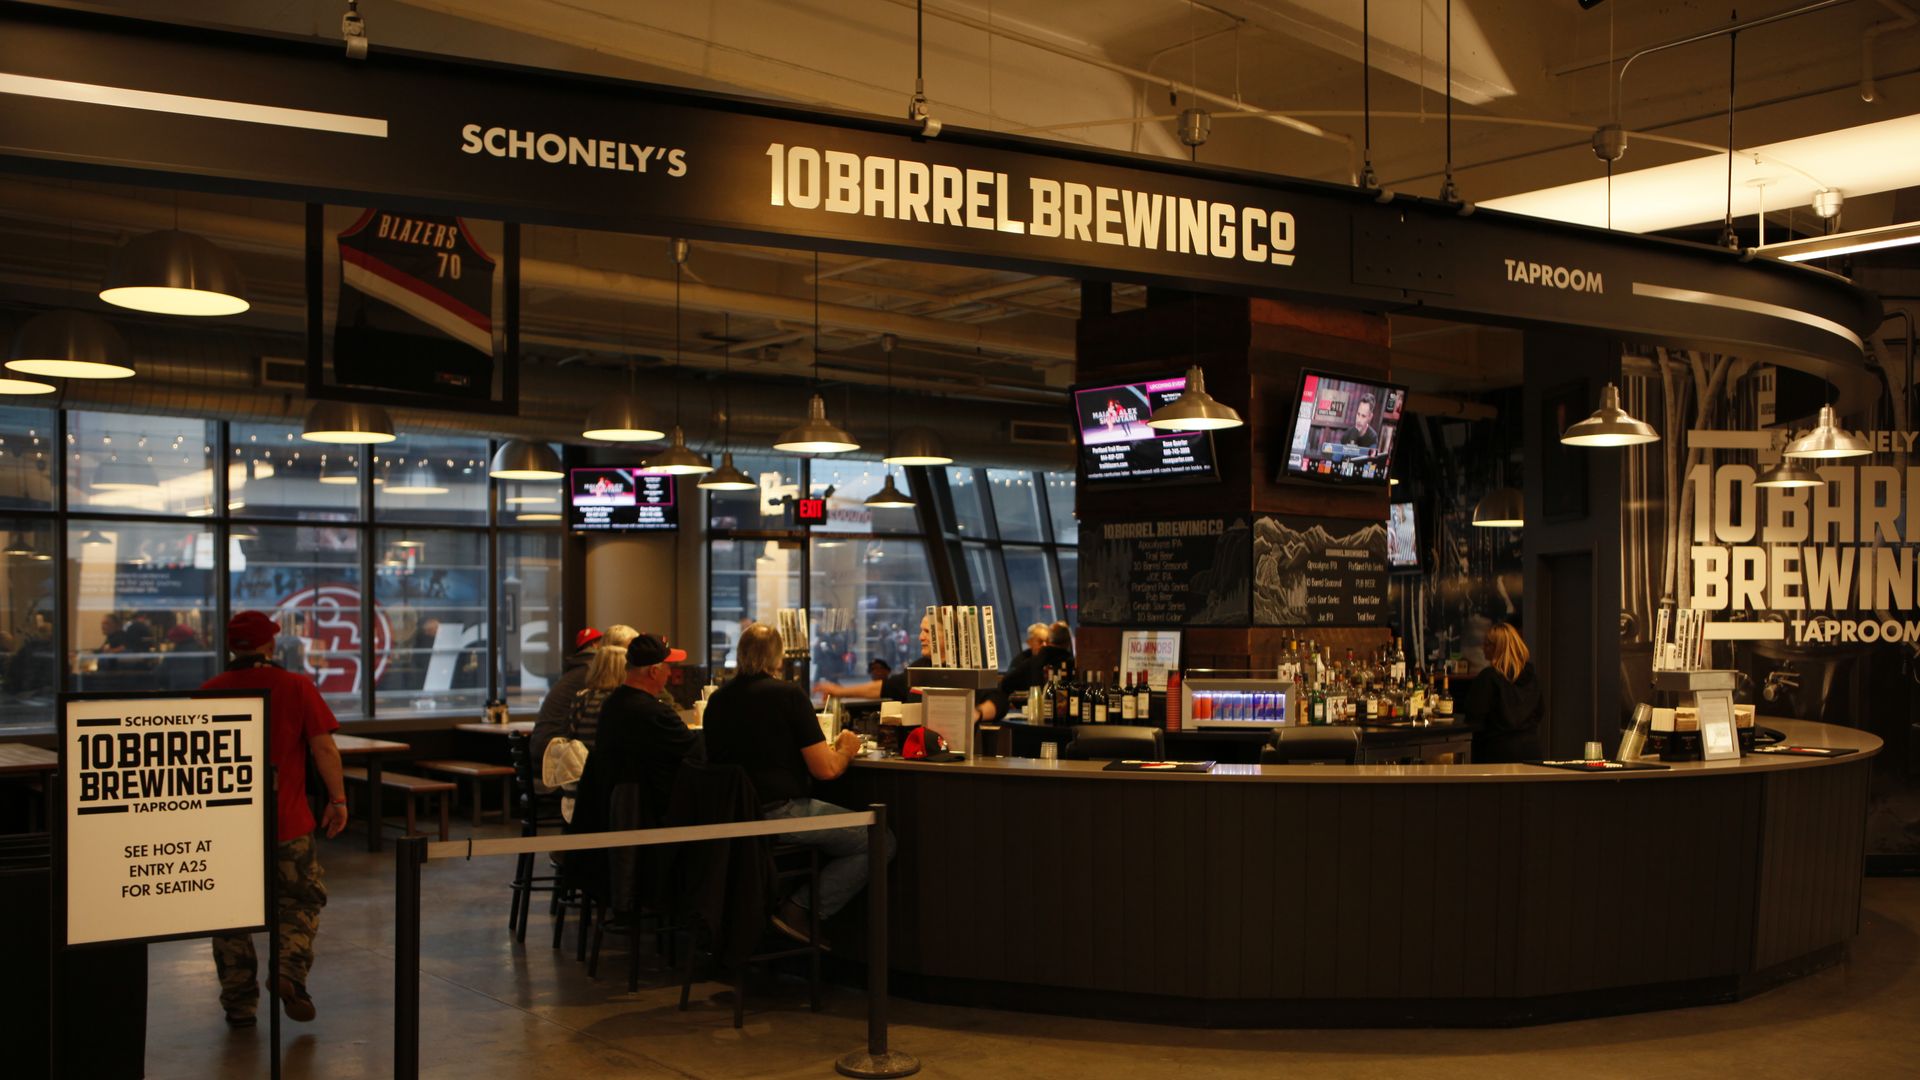 The interior of a bar with a sign reading 10 barrel brewing above it.